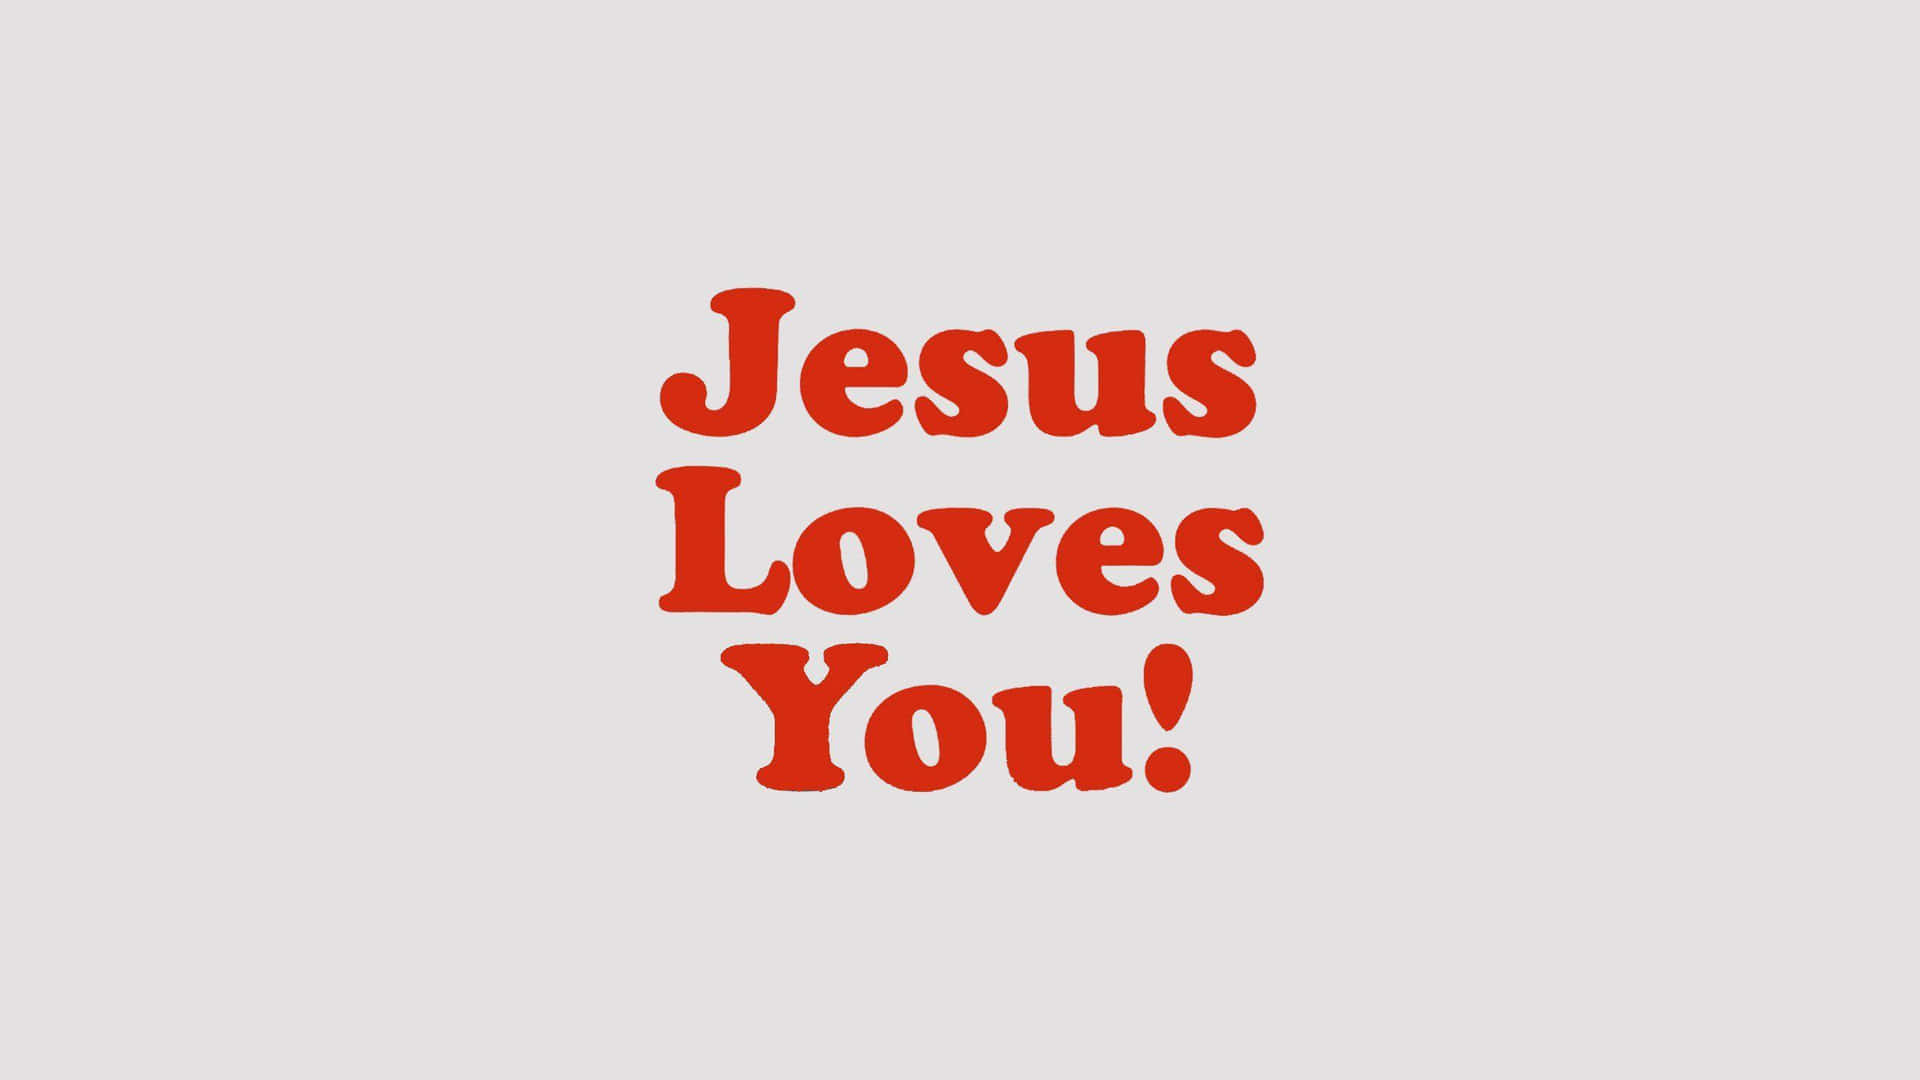 6748 God Loves You Images Stock Photos  Vectors  Shutterstock